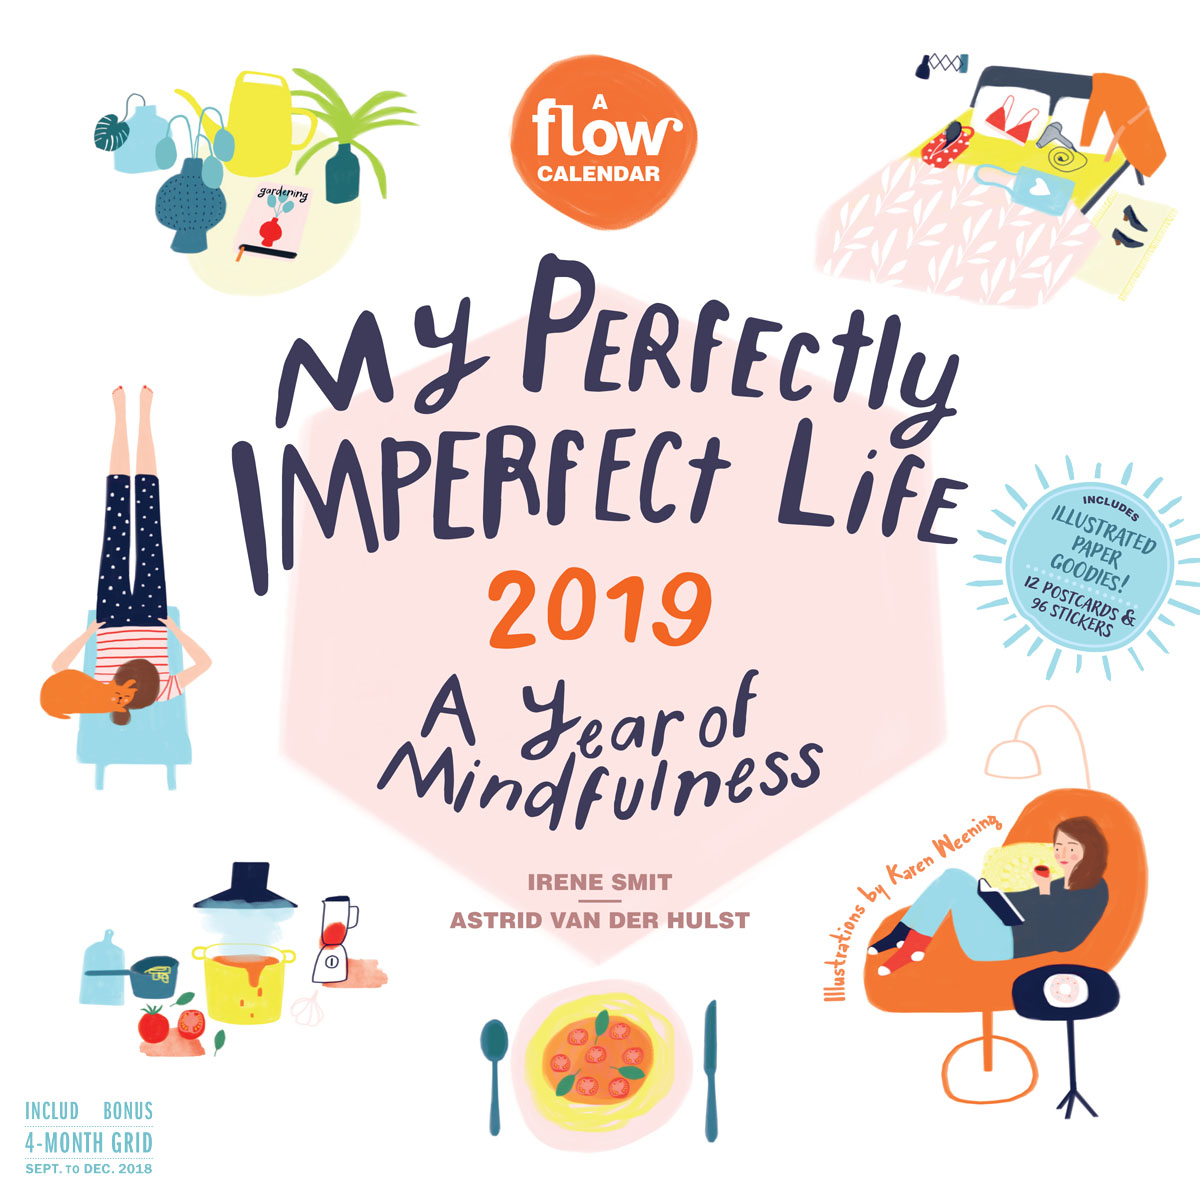 My Perfectly Imperfect Life 2019 calendar